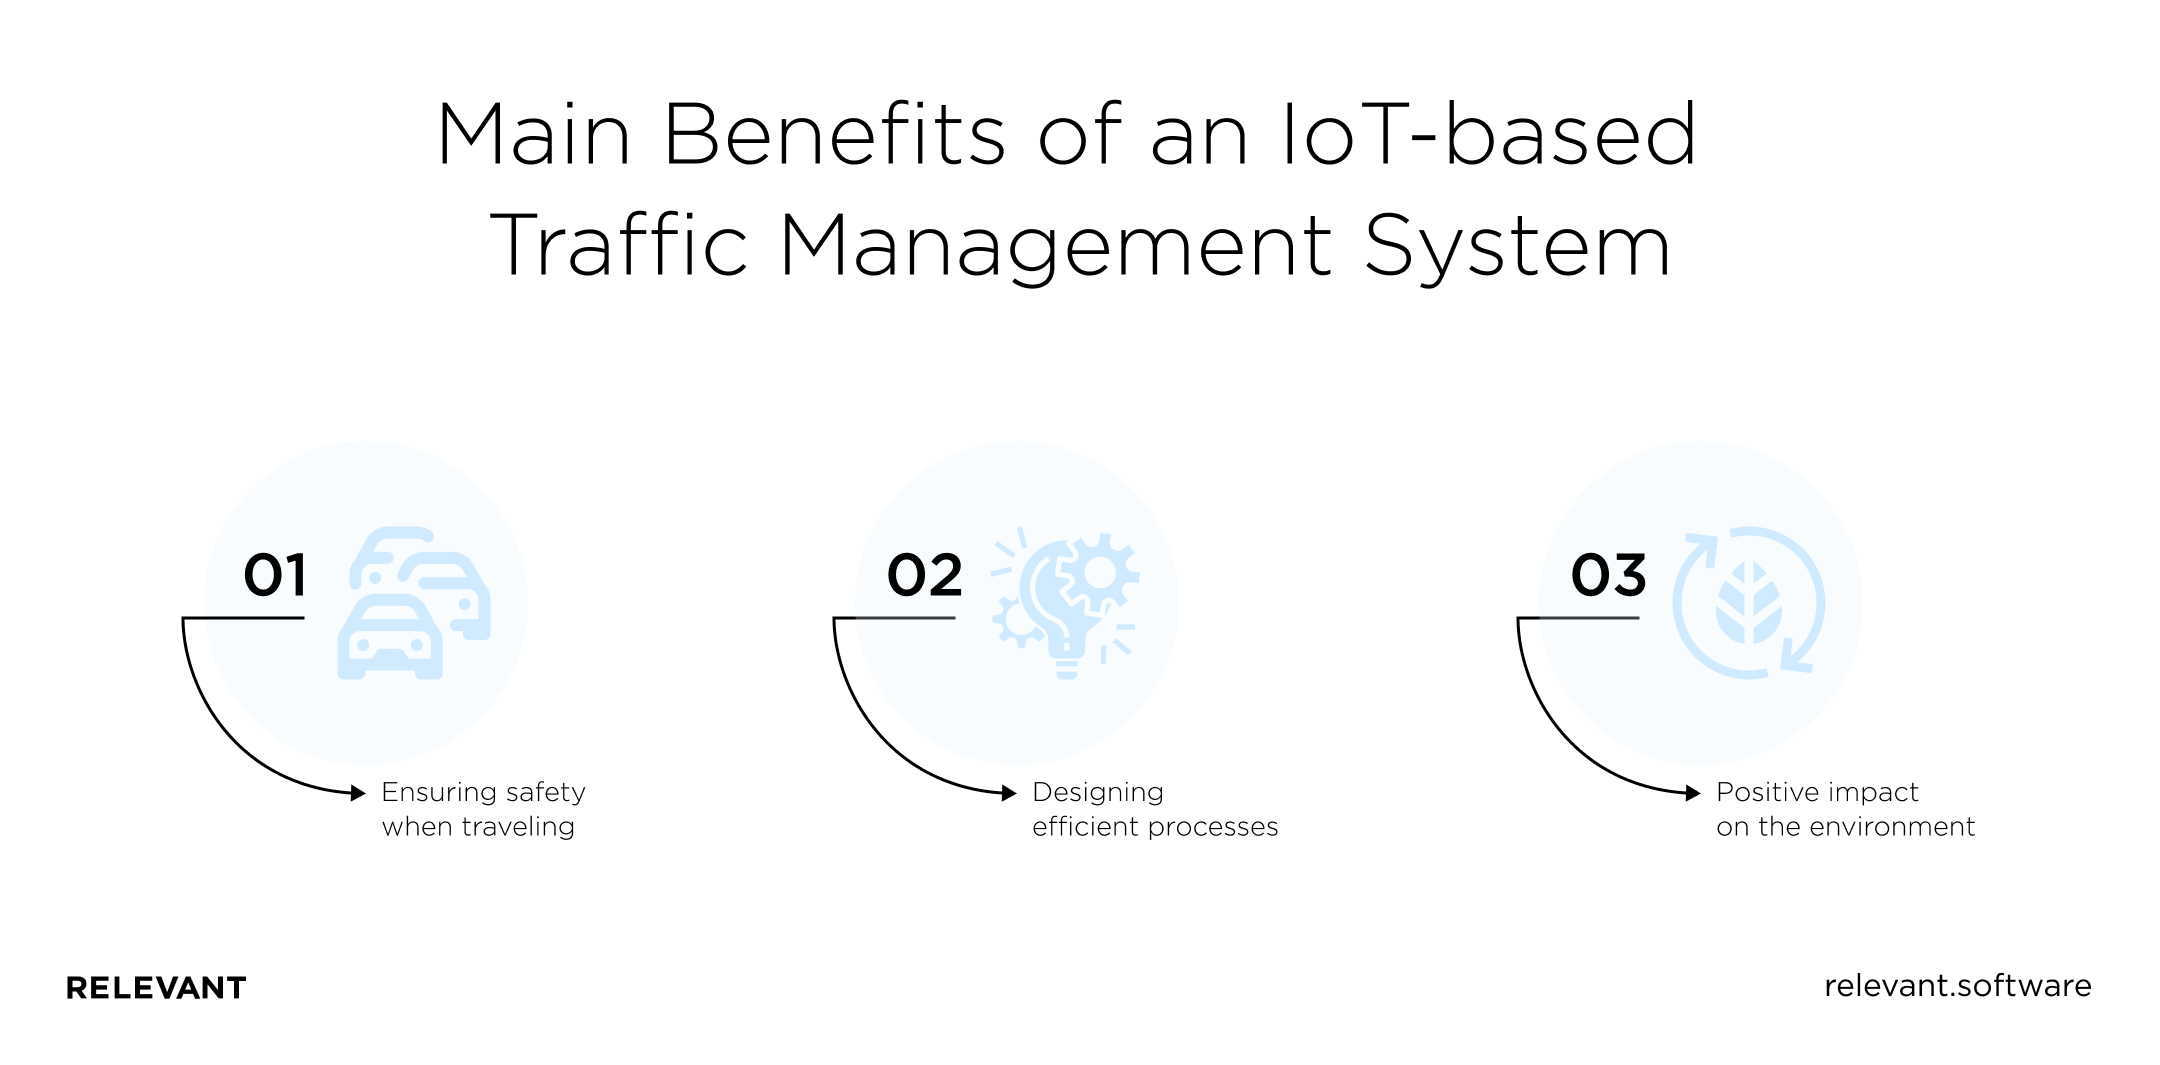  Main Benefits of an IoT-based Traffic Management System